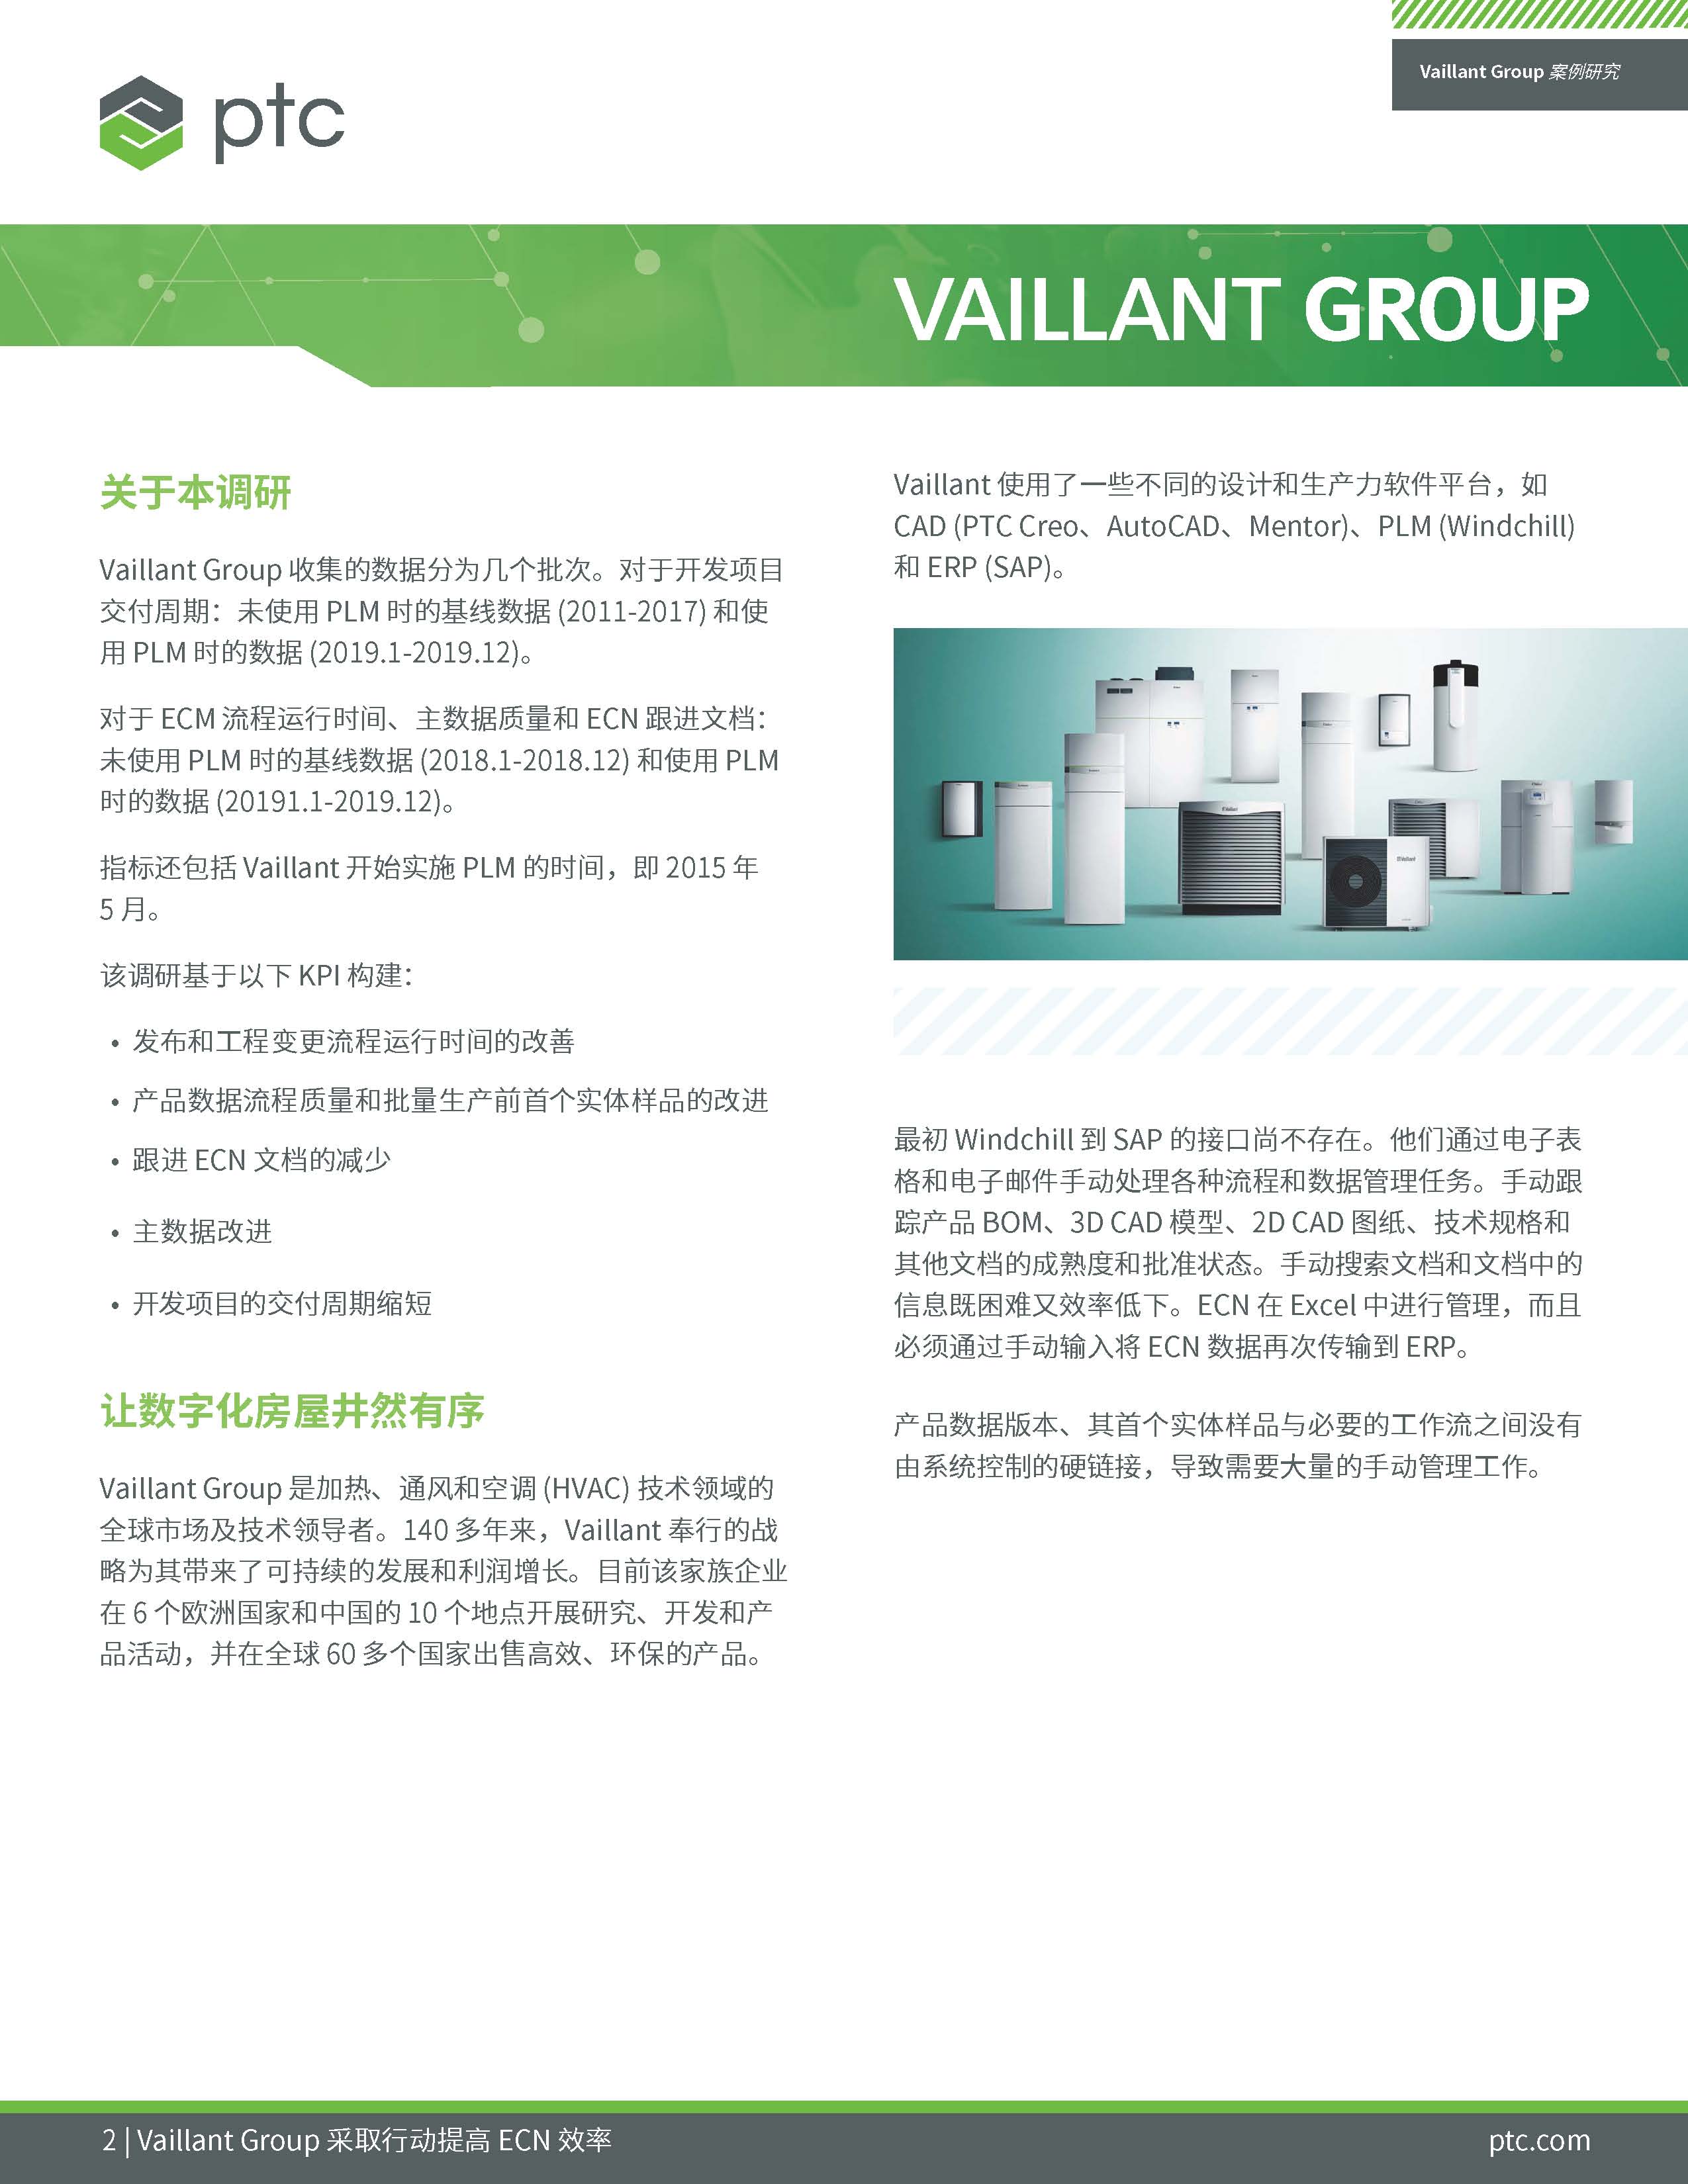 Vaillant Group's Digital Transformation (Chinese)_页面_02.jpg